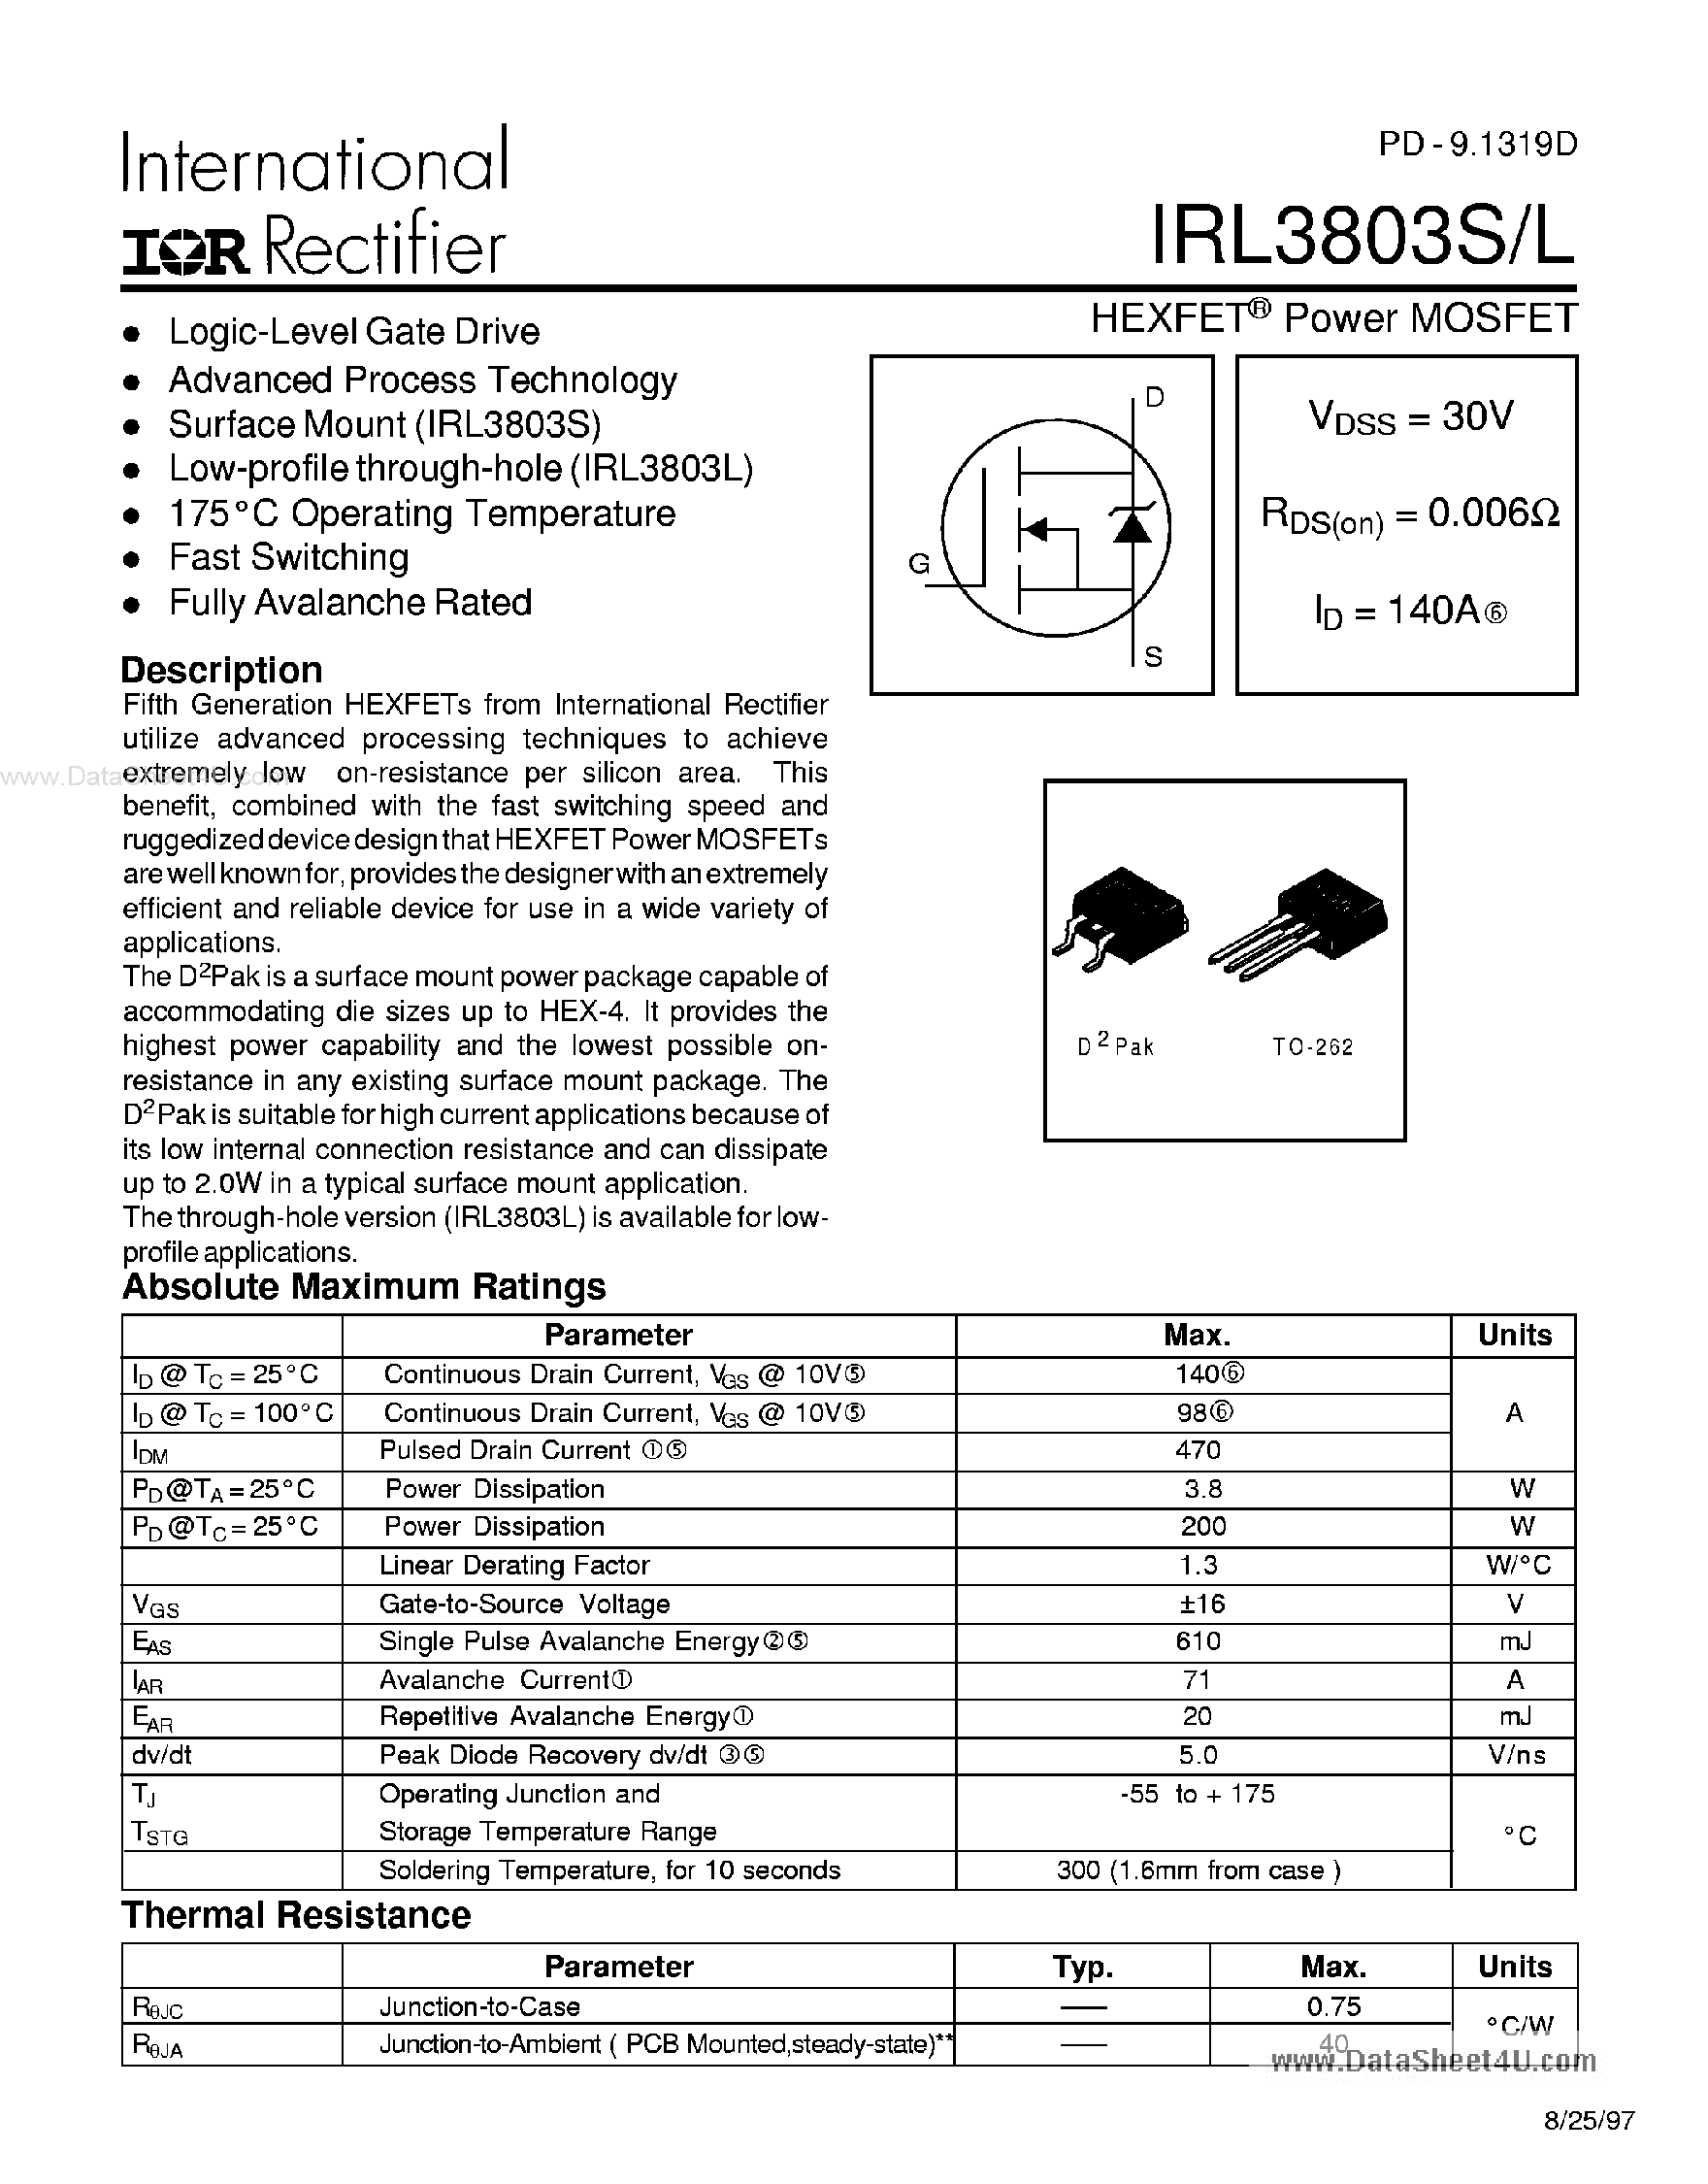 Datasheet L3803S - Search -----> IRL3803S page 1